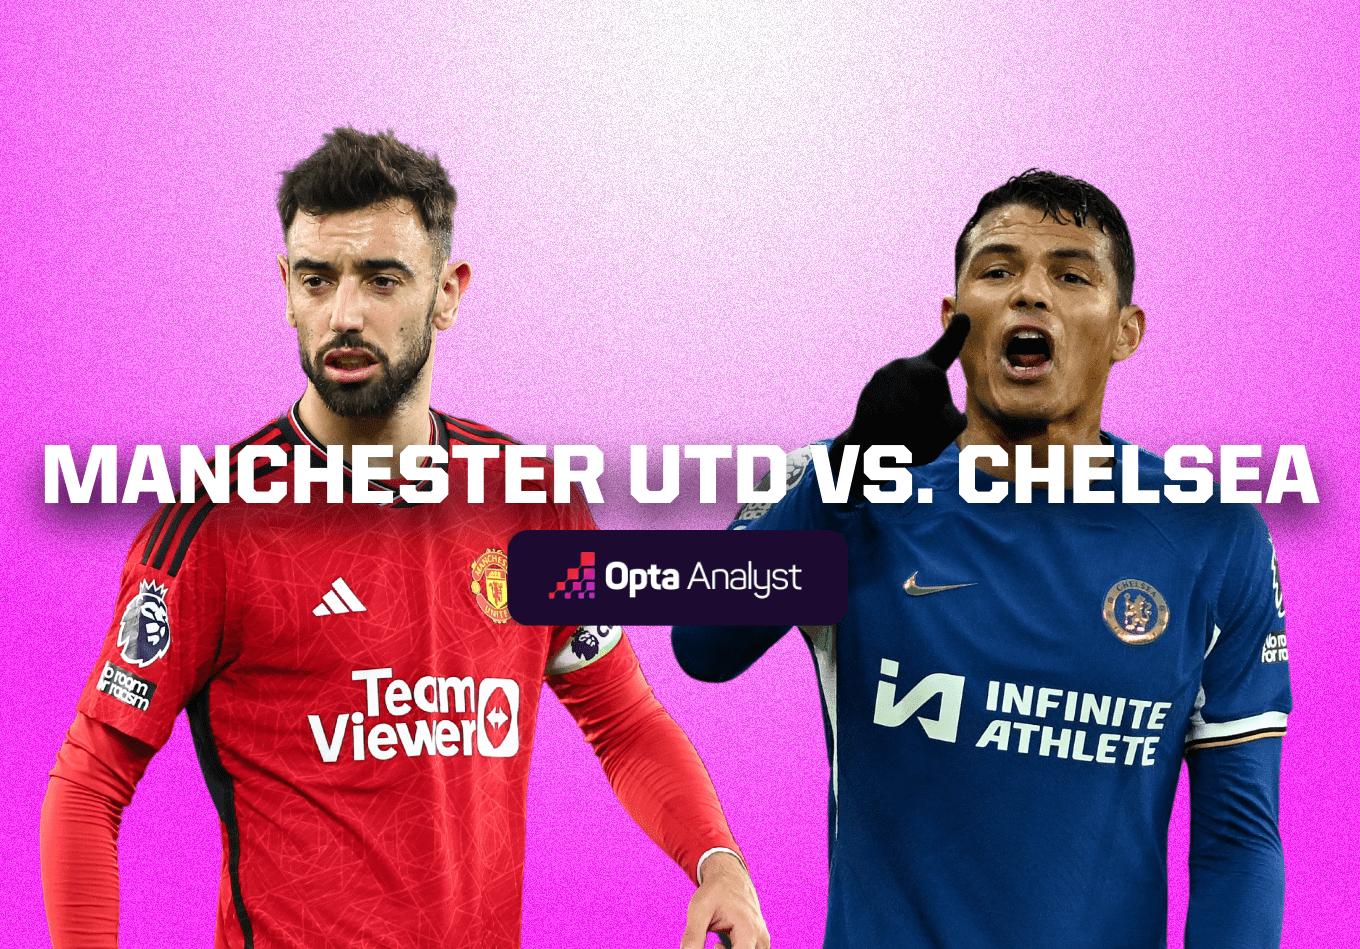 Manchester United vs Chelsea: Prediction and Preview